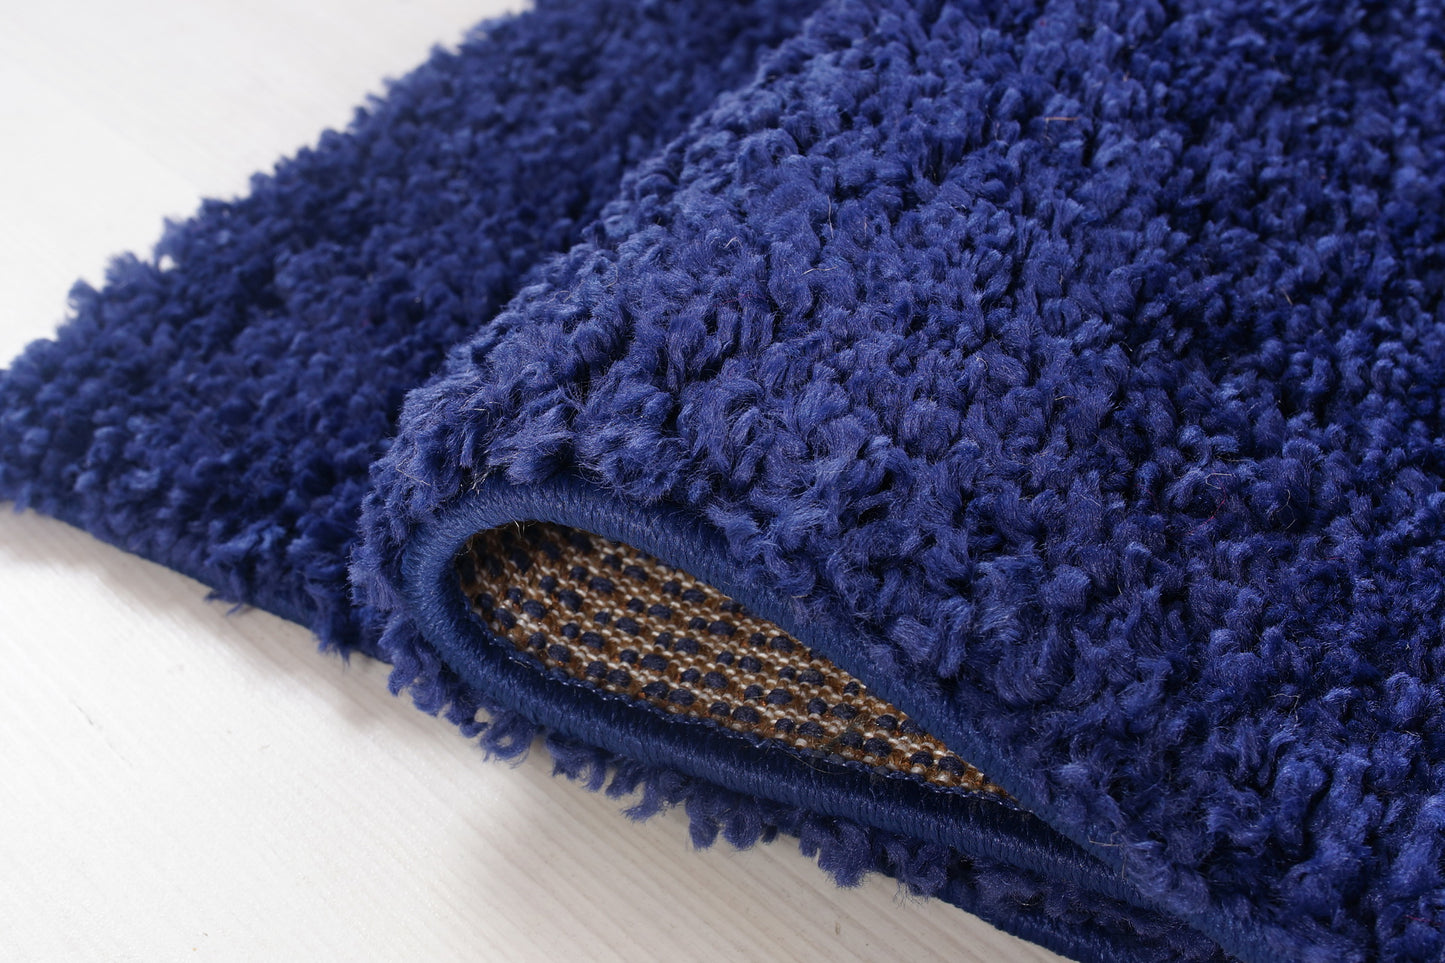 ladole rugs solid color shaggy meknes durable beautiful turkish indoor small mat doormat rug in navy blue 110 x 211 57cm x 90cm 4x6, 4x5 ft Small Carpet, Home Office, Living Room, Bedroom